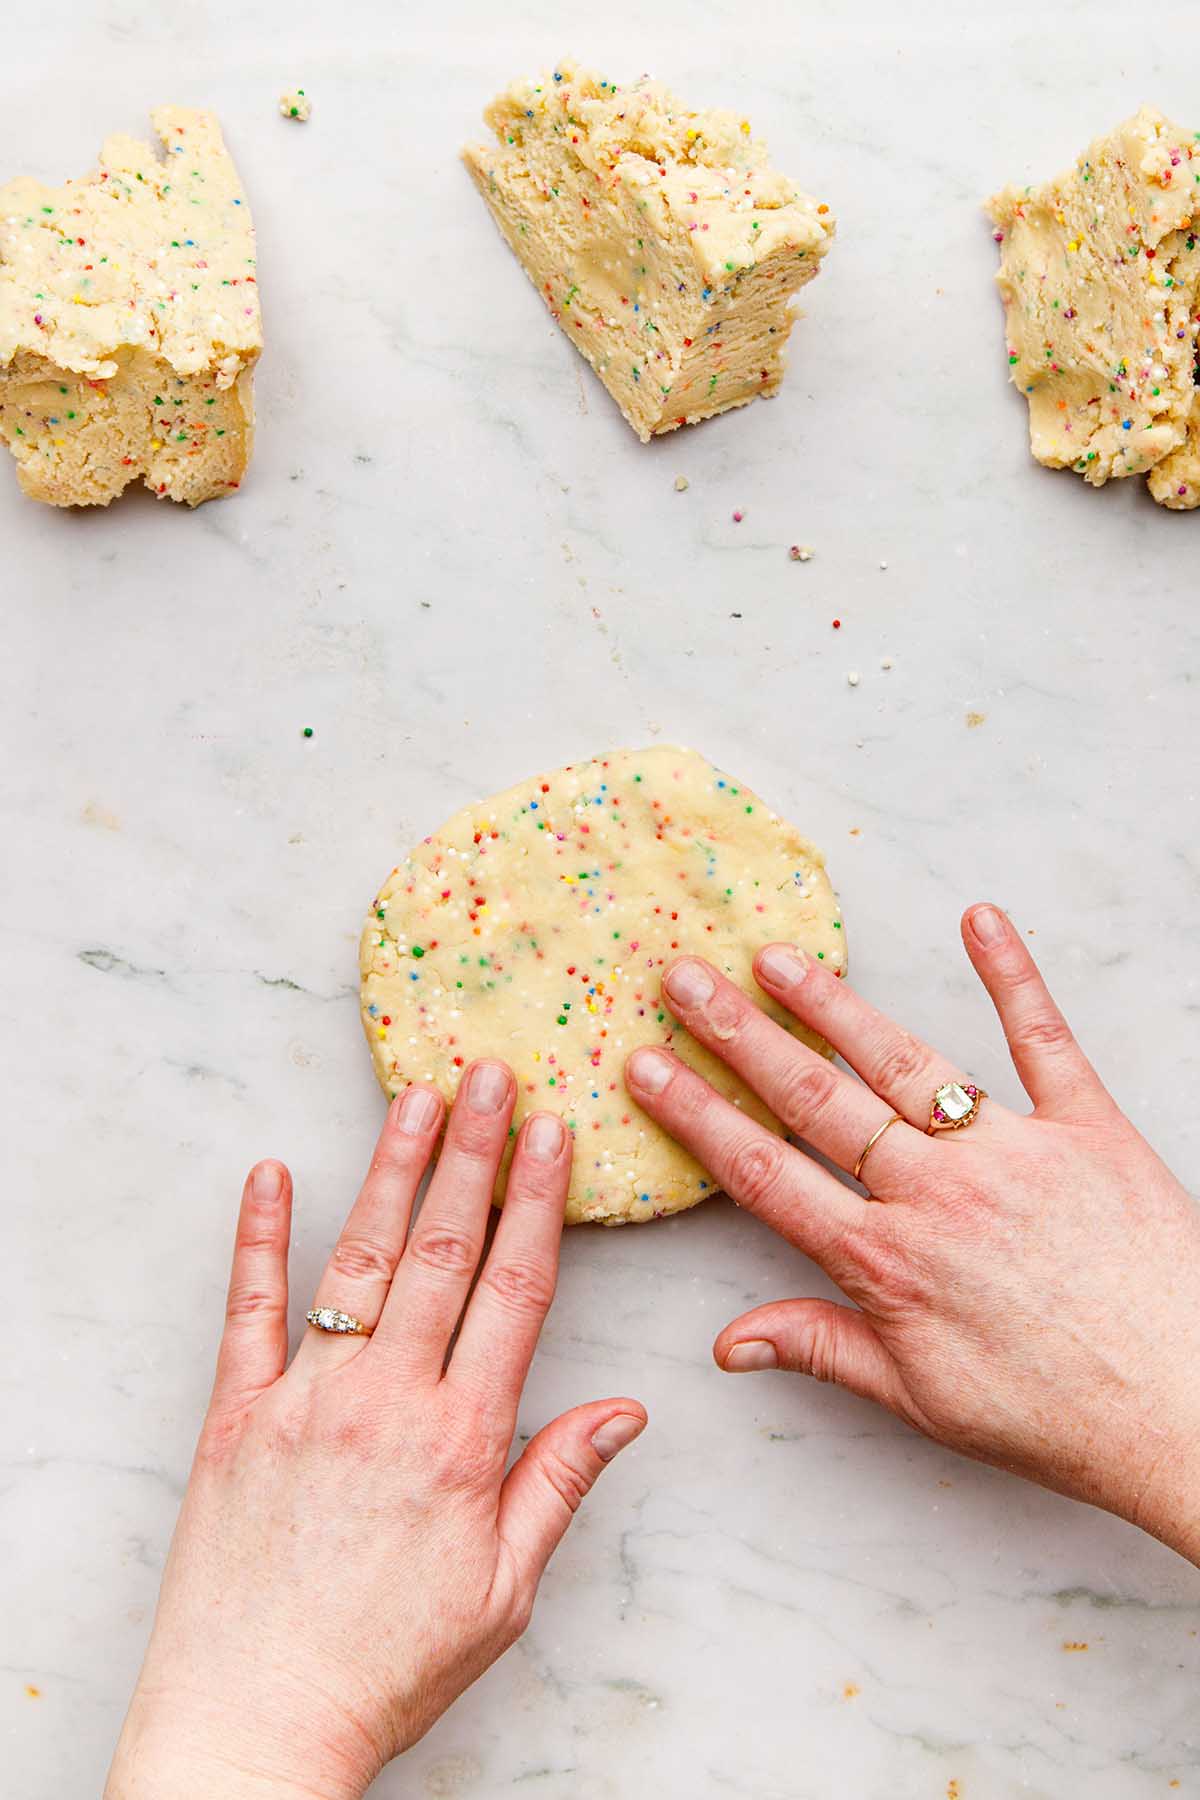 Hands forming a chunk of cookie dough into a flat disc.